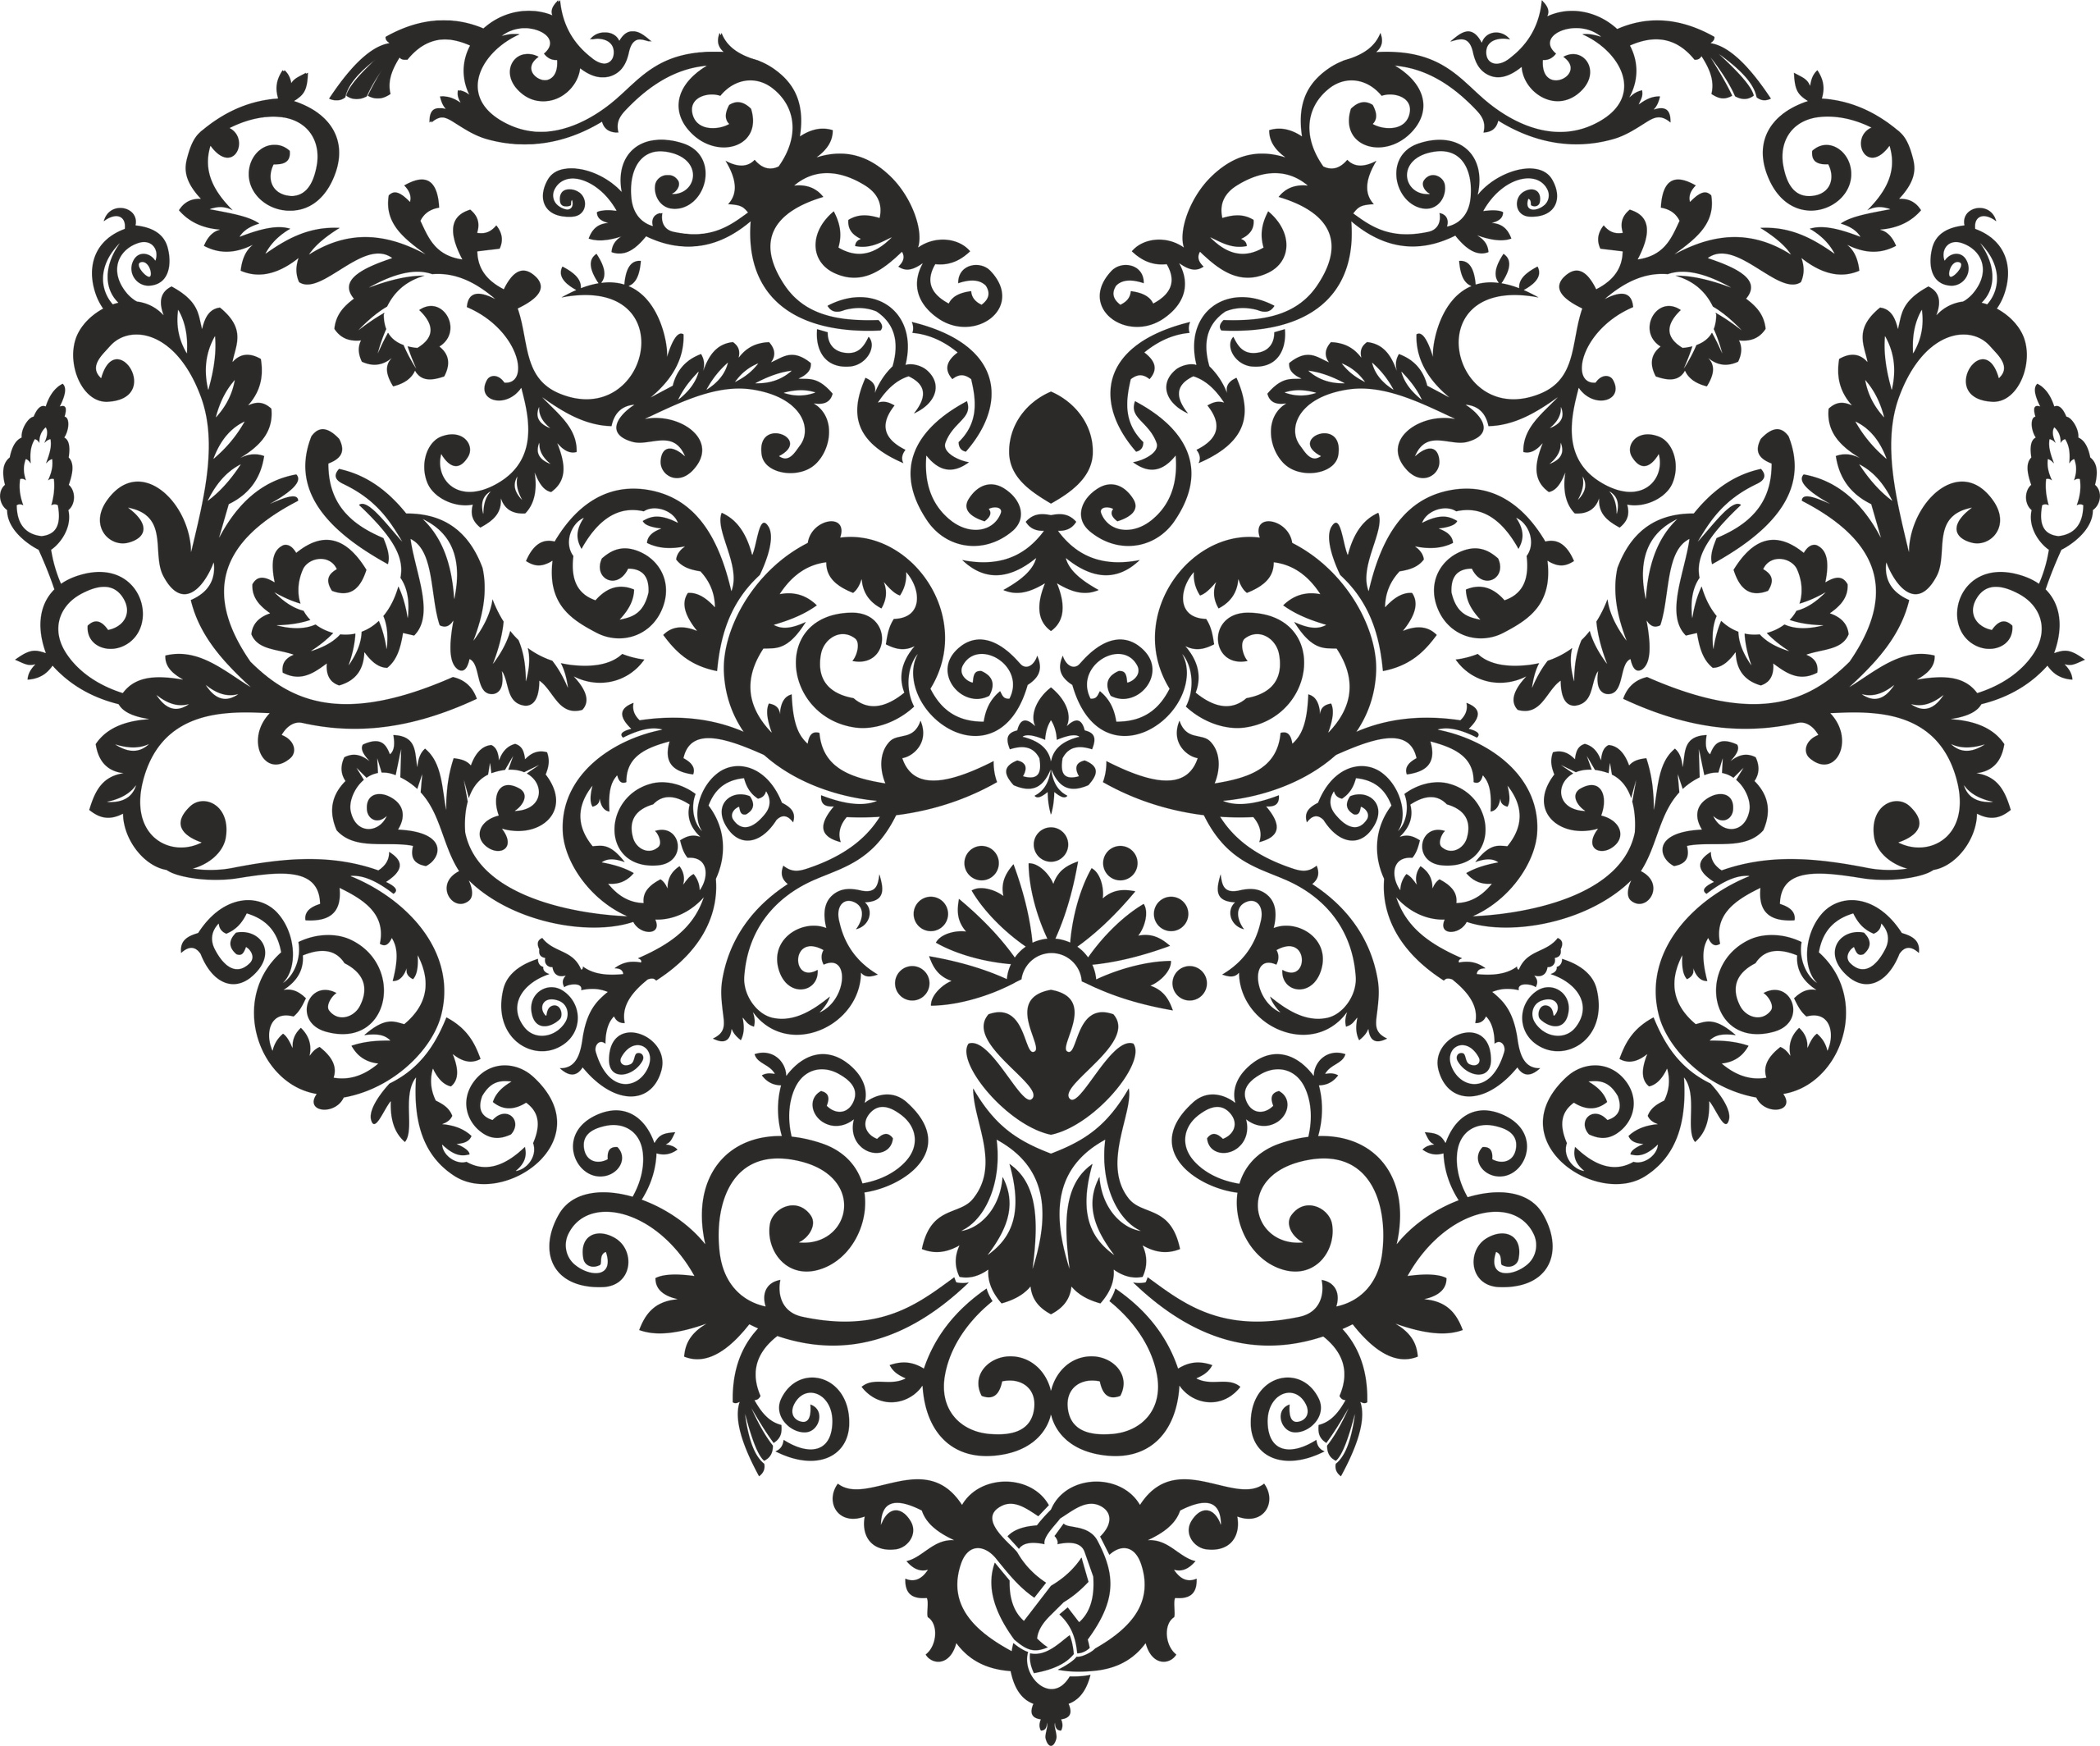 Shaped Heart Vector Free Vector cdr Download - 3axis.co